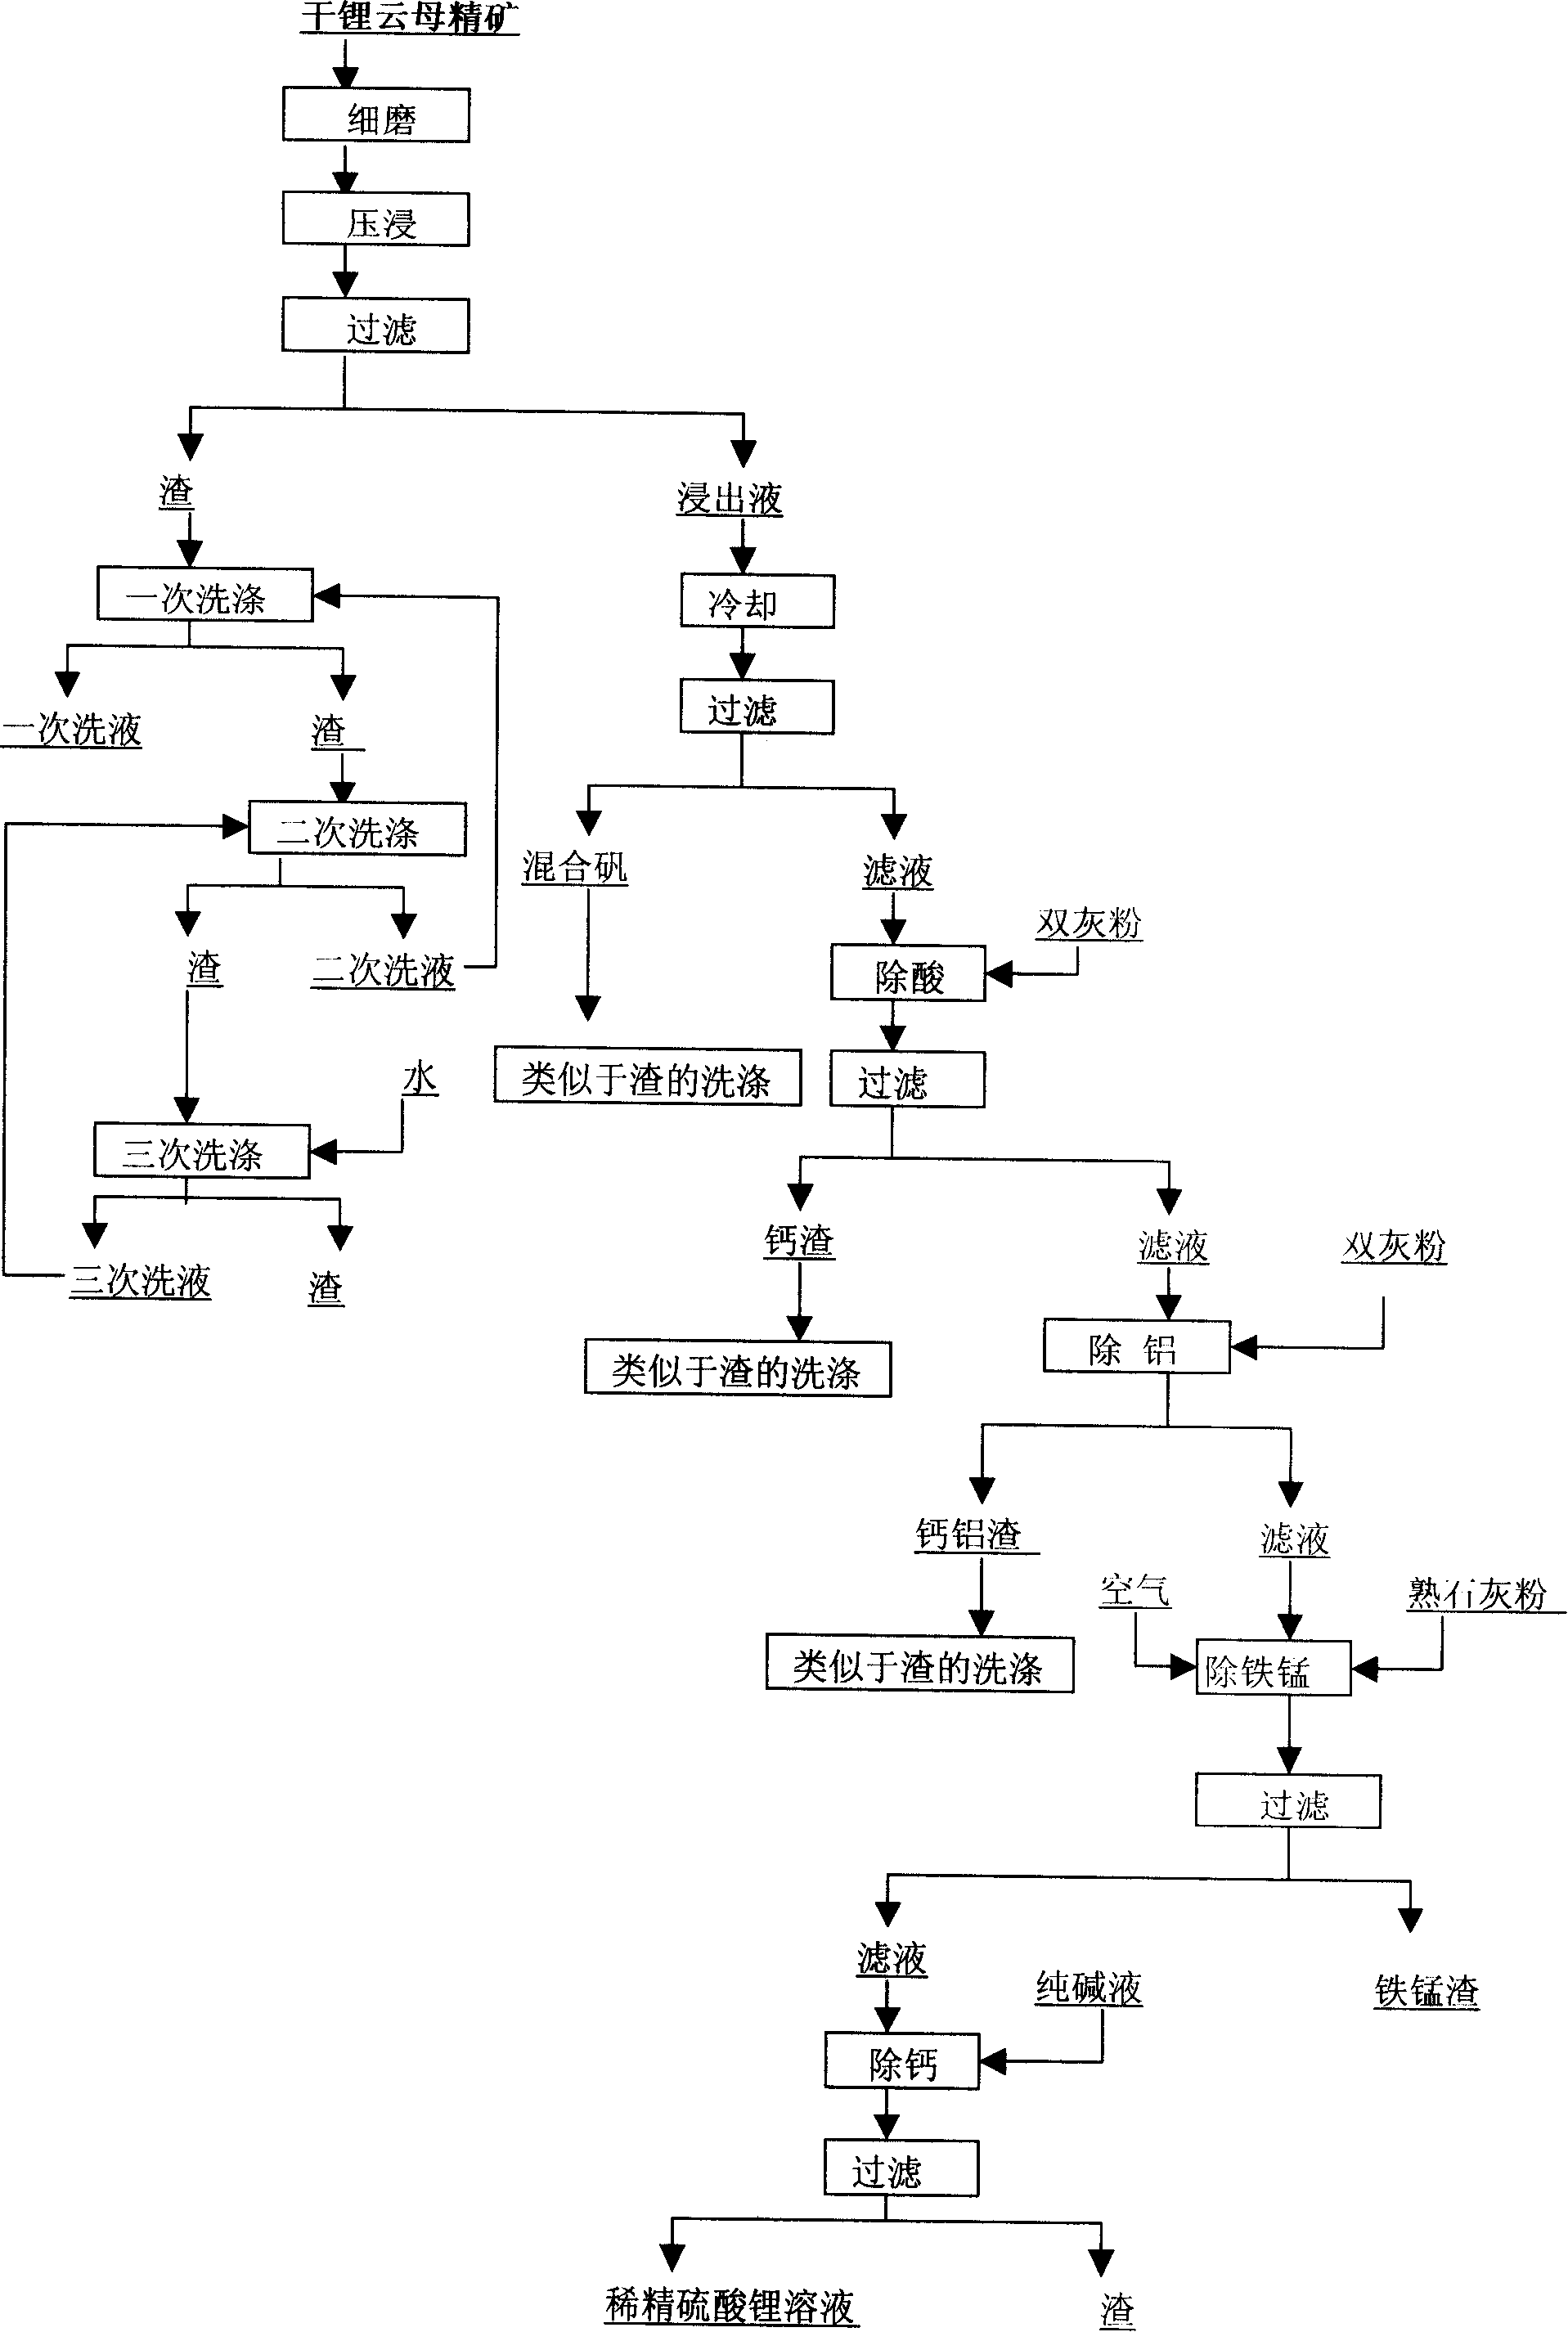 Method for producing refined lithium sulfate solution used in lepidolite lithium-extracting technique by sulfuric acid process